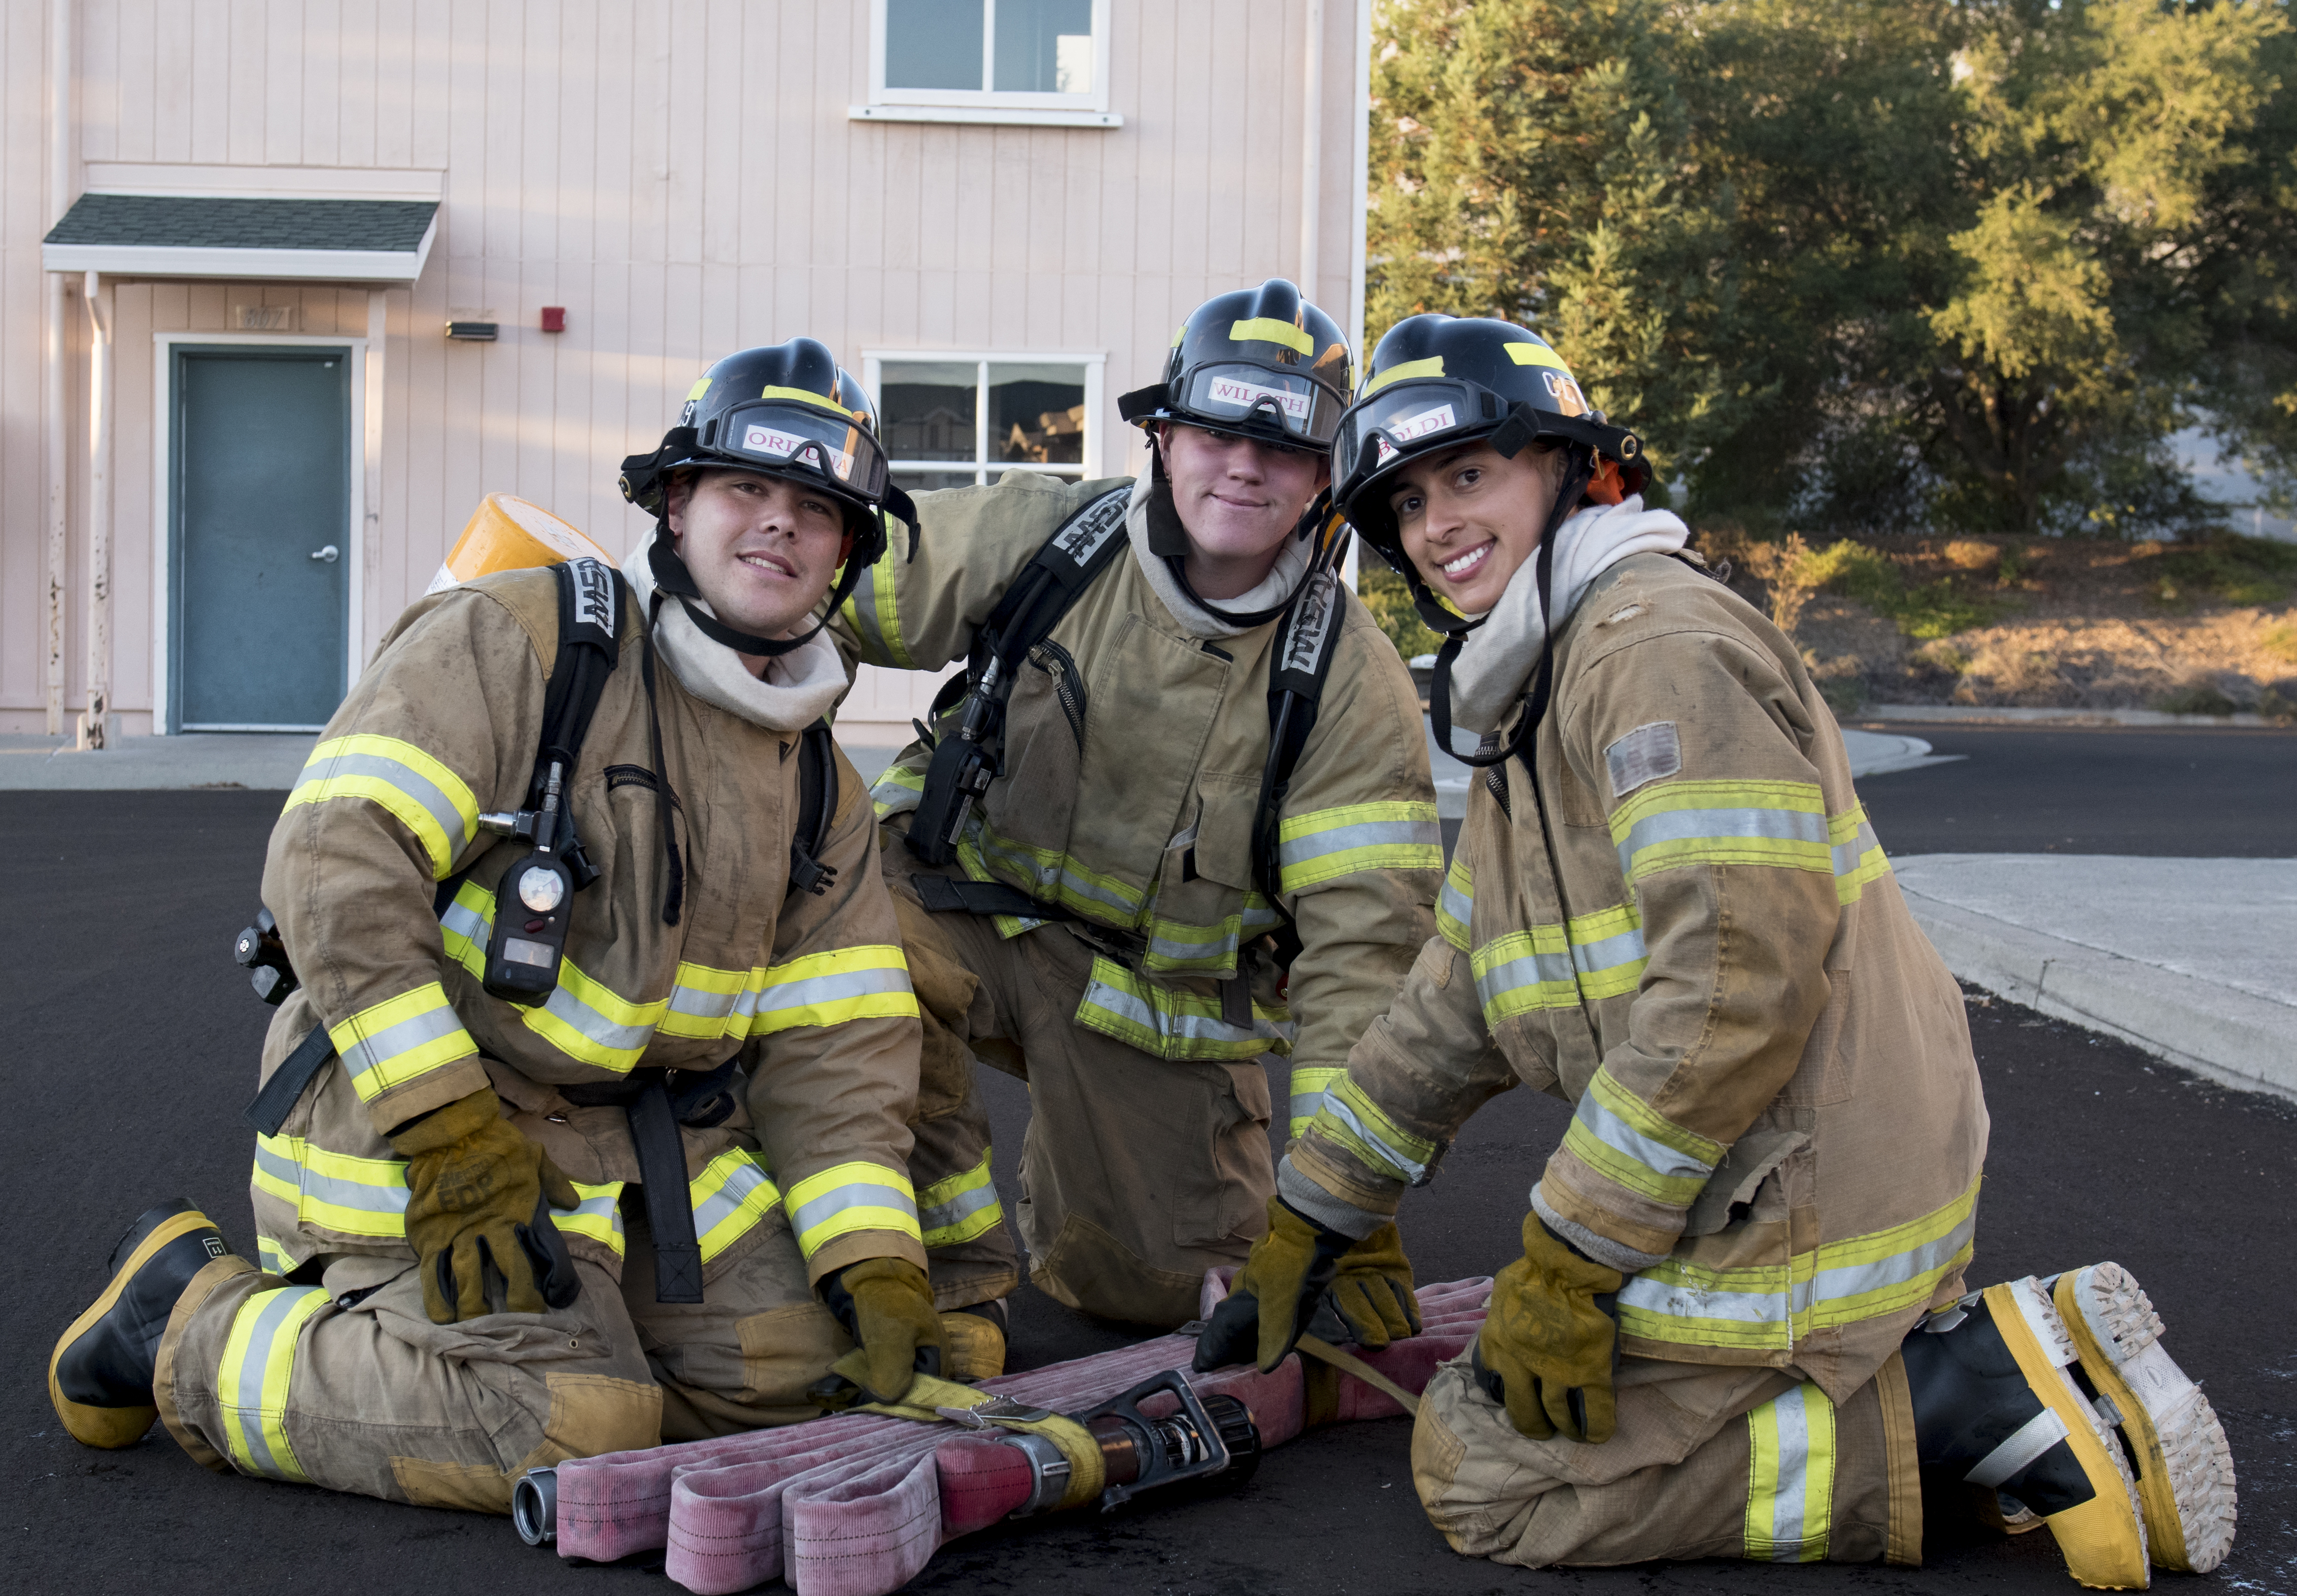 Three firefighter trainees in a group wearing their firefighting gear kneeling with a firehose between them